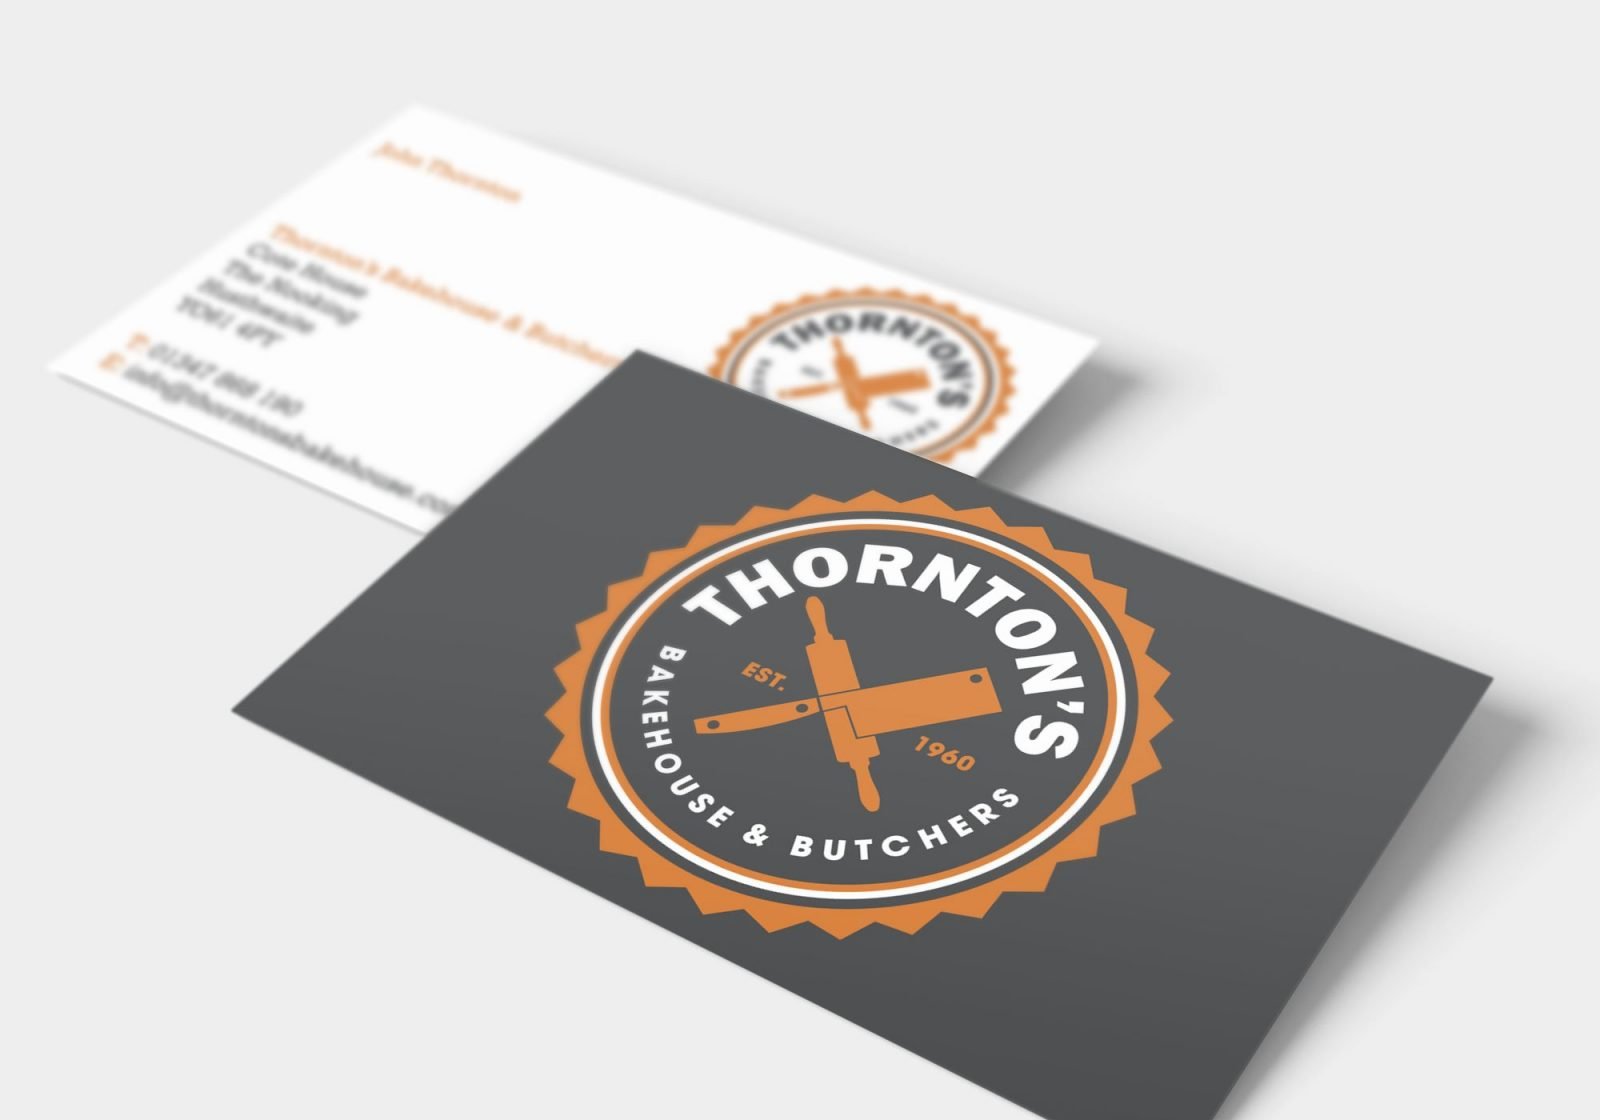 A business card design for Thornton's Butchers and Bakehouse